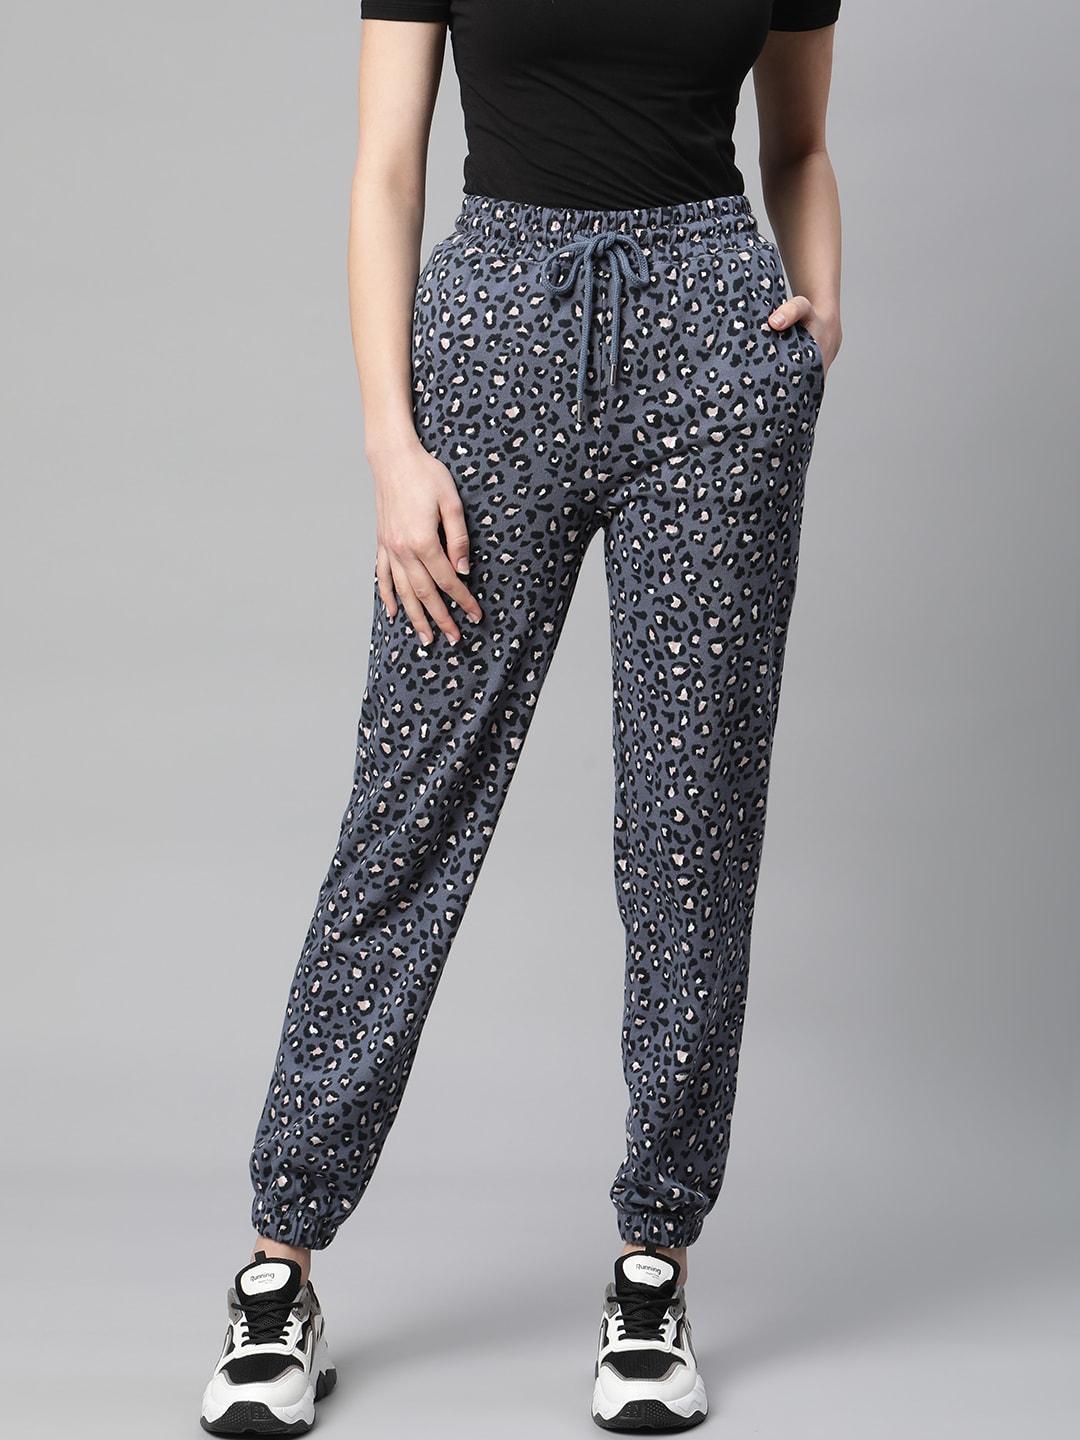 marks-&-spencer-women-blue-&-black-pure-cotton-animal-printed-track-pants